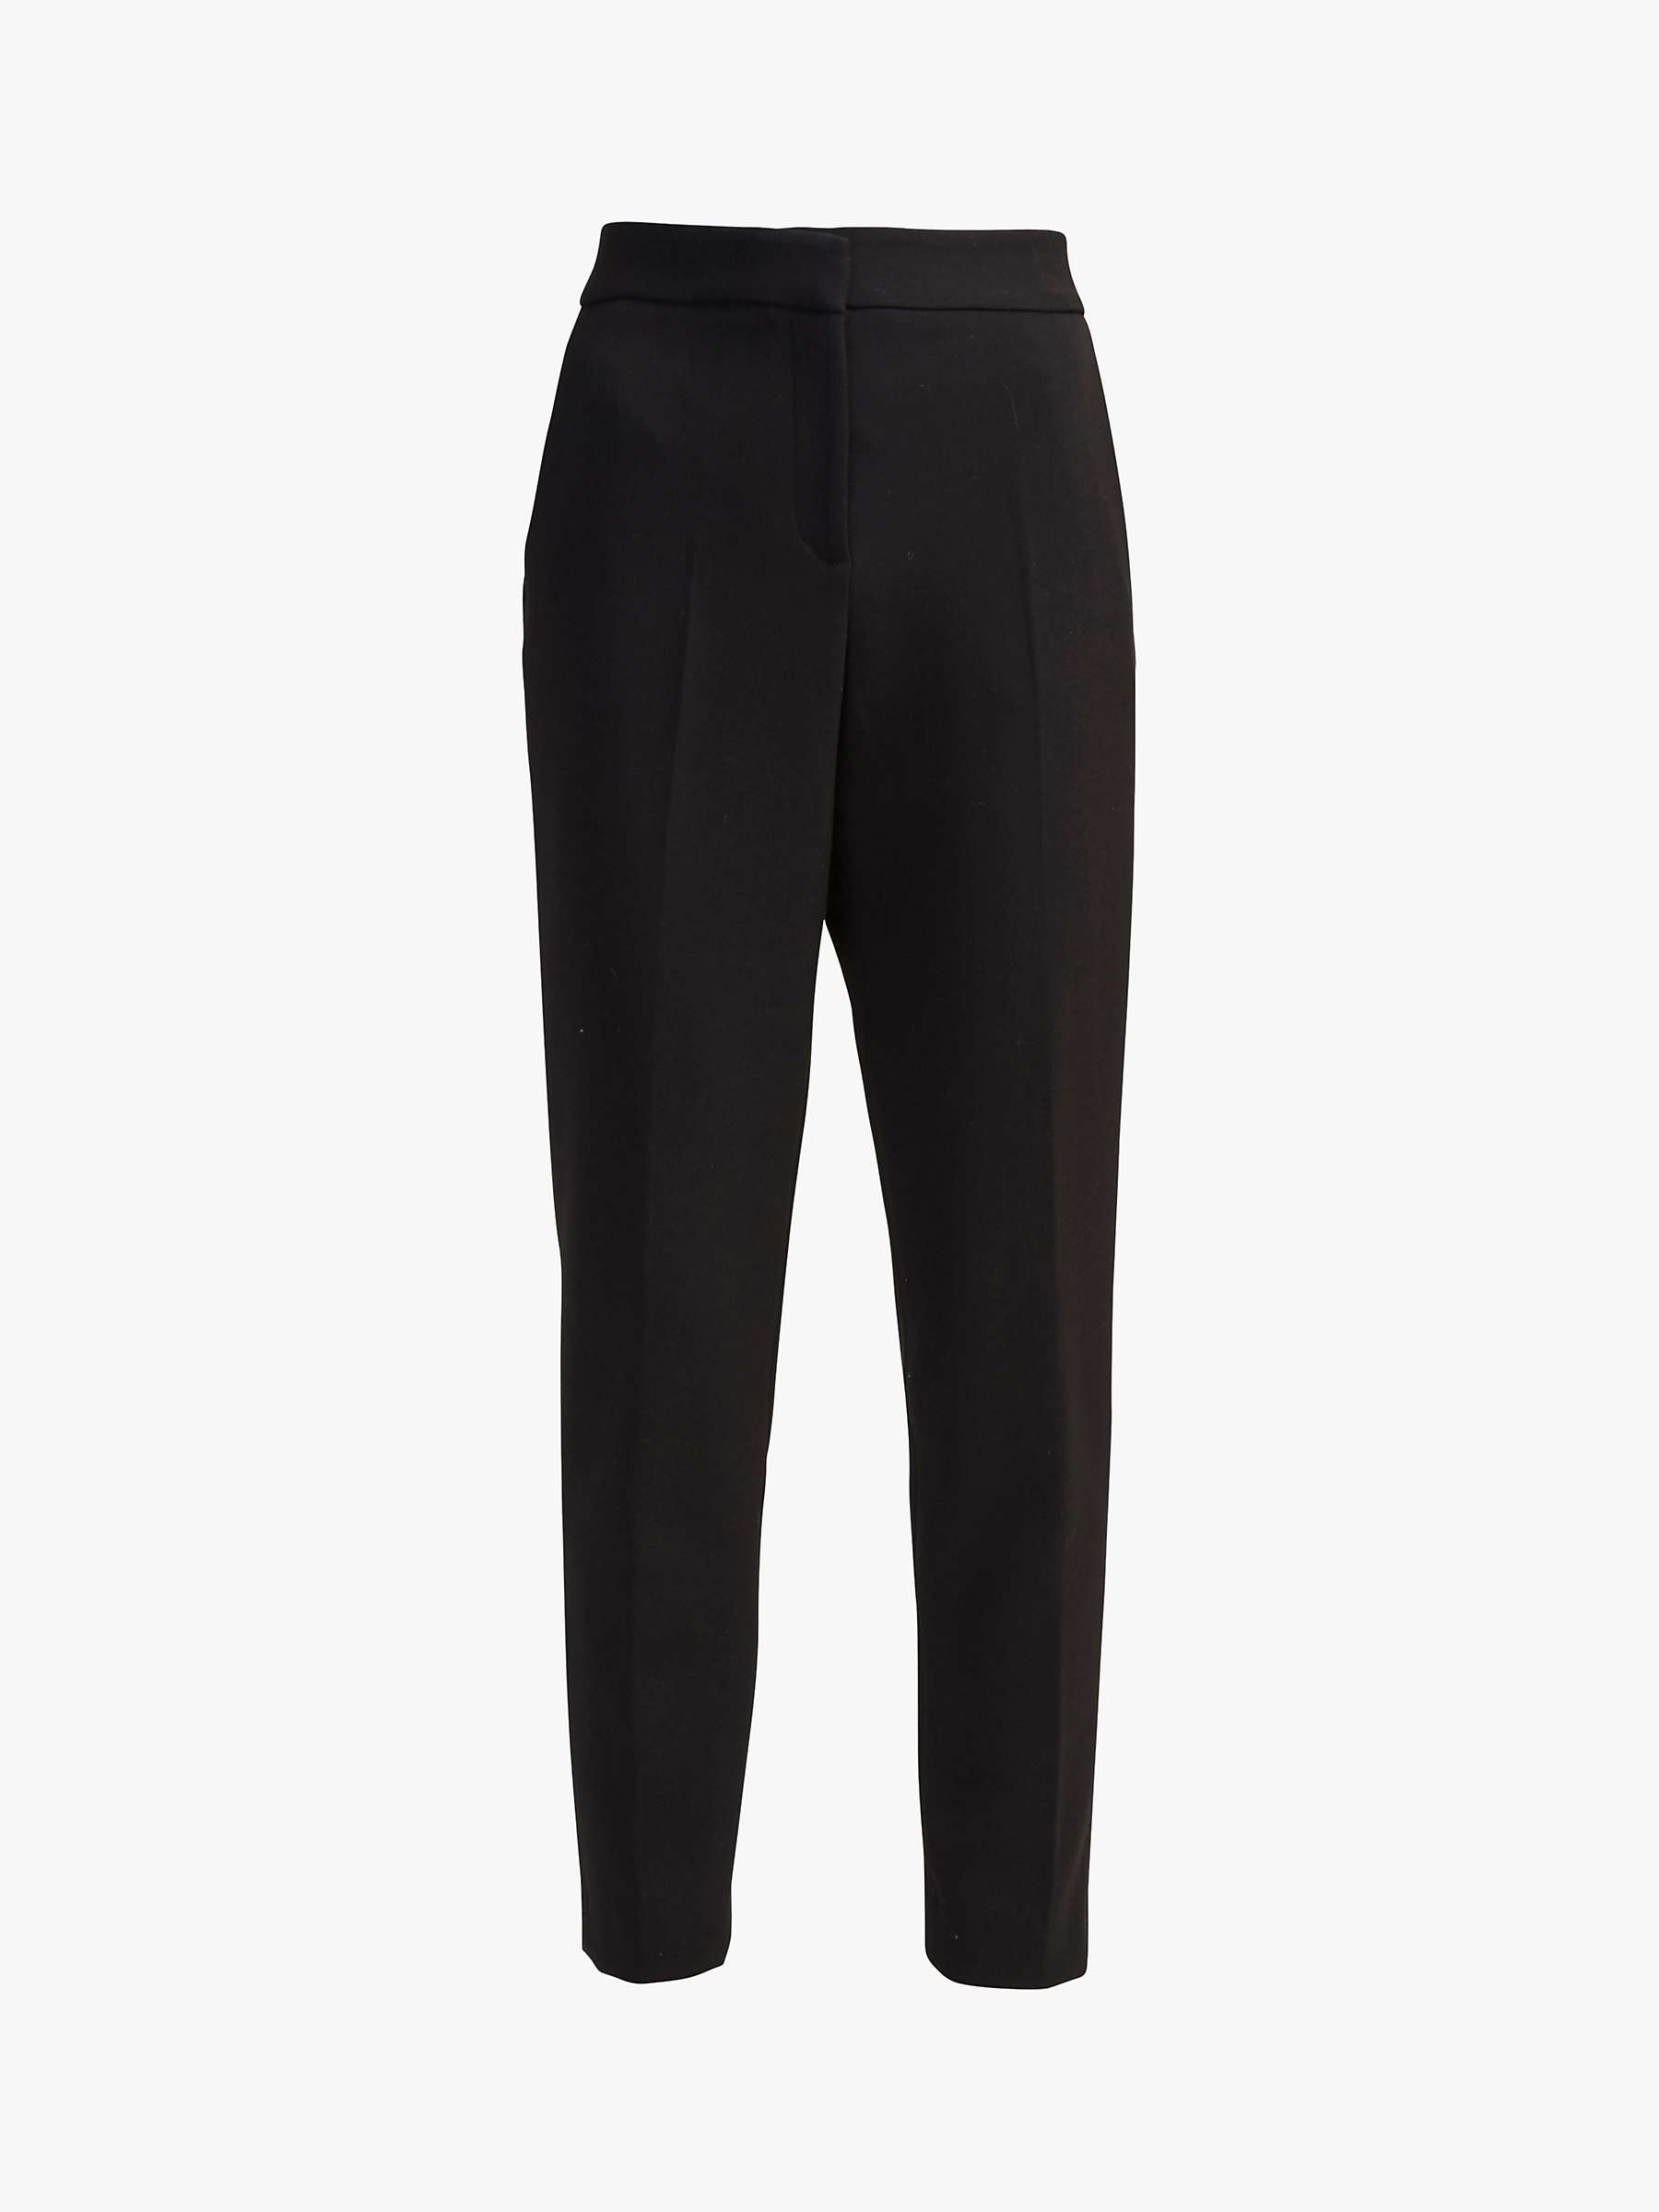 Buy French Connection Fino Glass Stretch Slim Trousers, Black Online at johnlewis.com